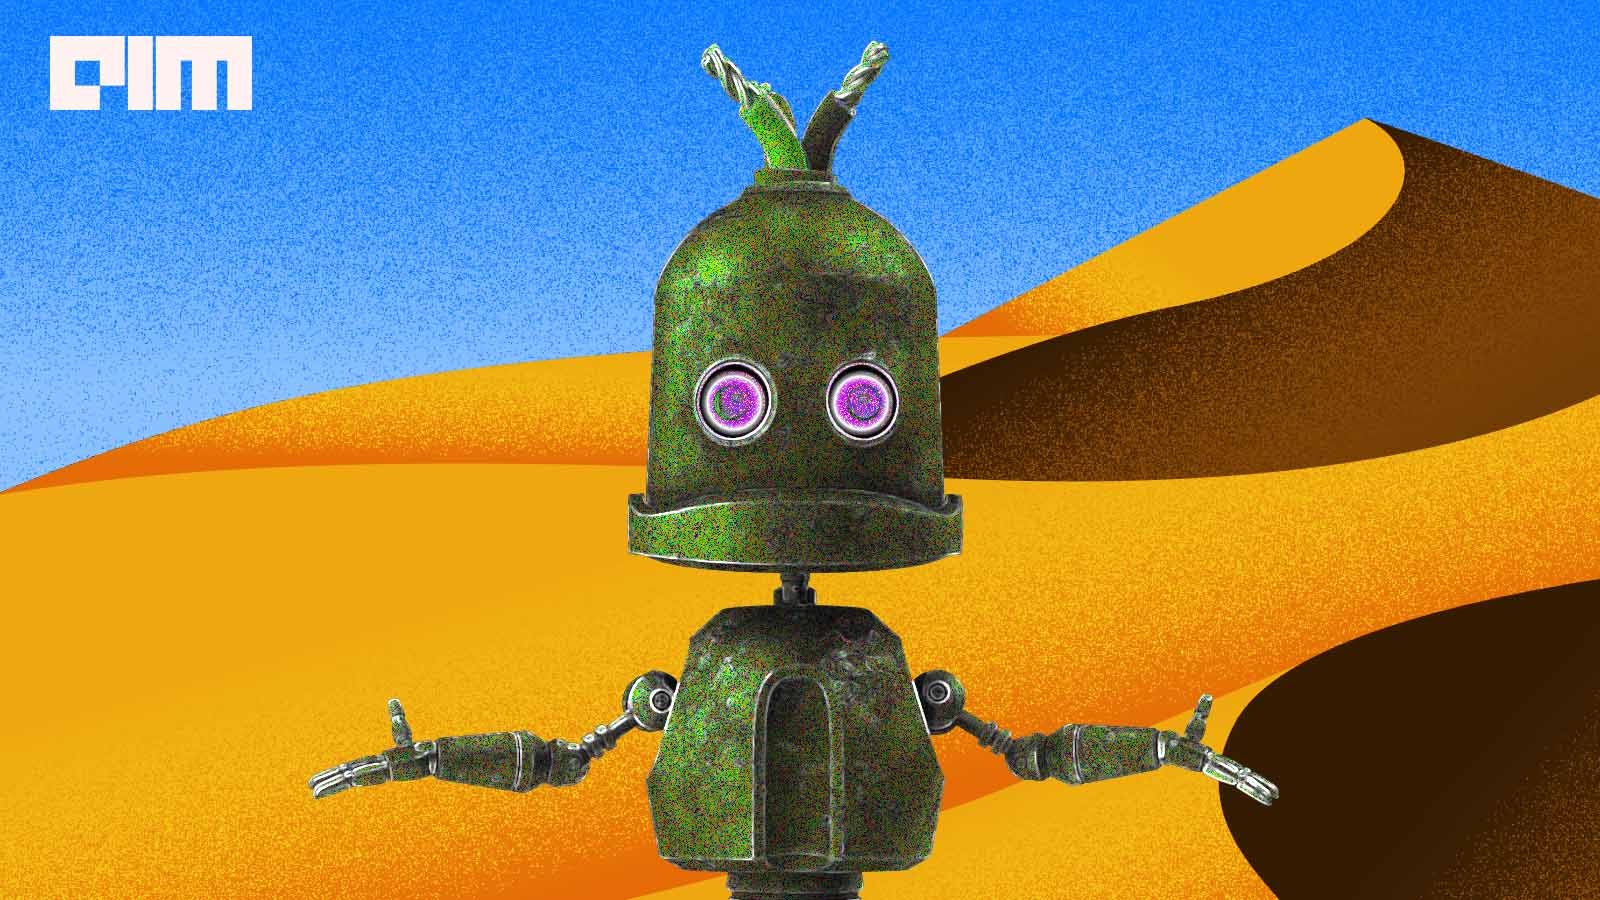 Why We Don’t See More Robotics Startups